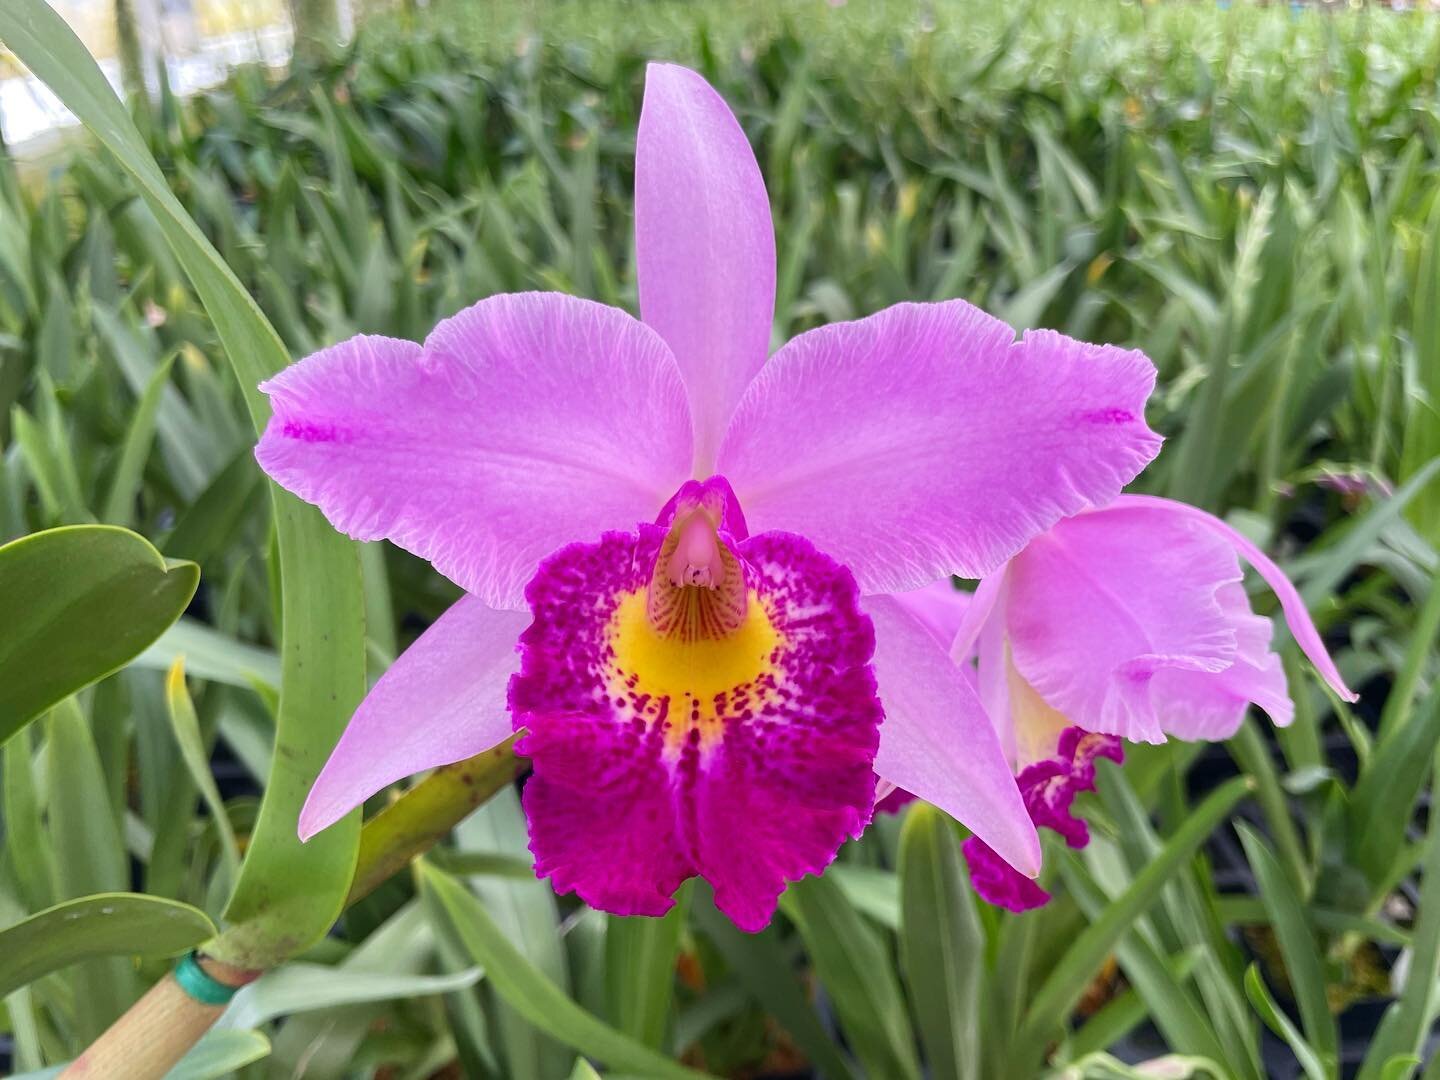 Excited about our first flowering of Bc. Tetradip 'Junko' &times; Rlc. (Pot.) Elegant Dancer 'Rouge&rsquo;! With B. Nodosa in his breeding background, these plants are fast growing and easy flowering.

#newnew #instsgood #homedecor #wholesale #orchid